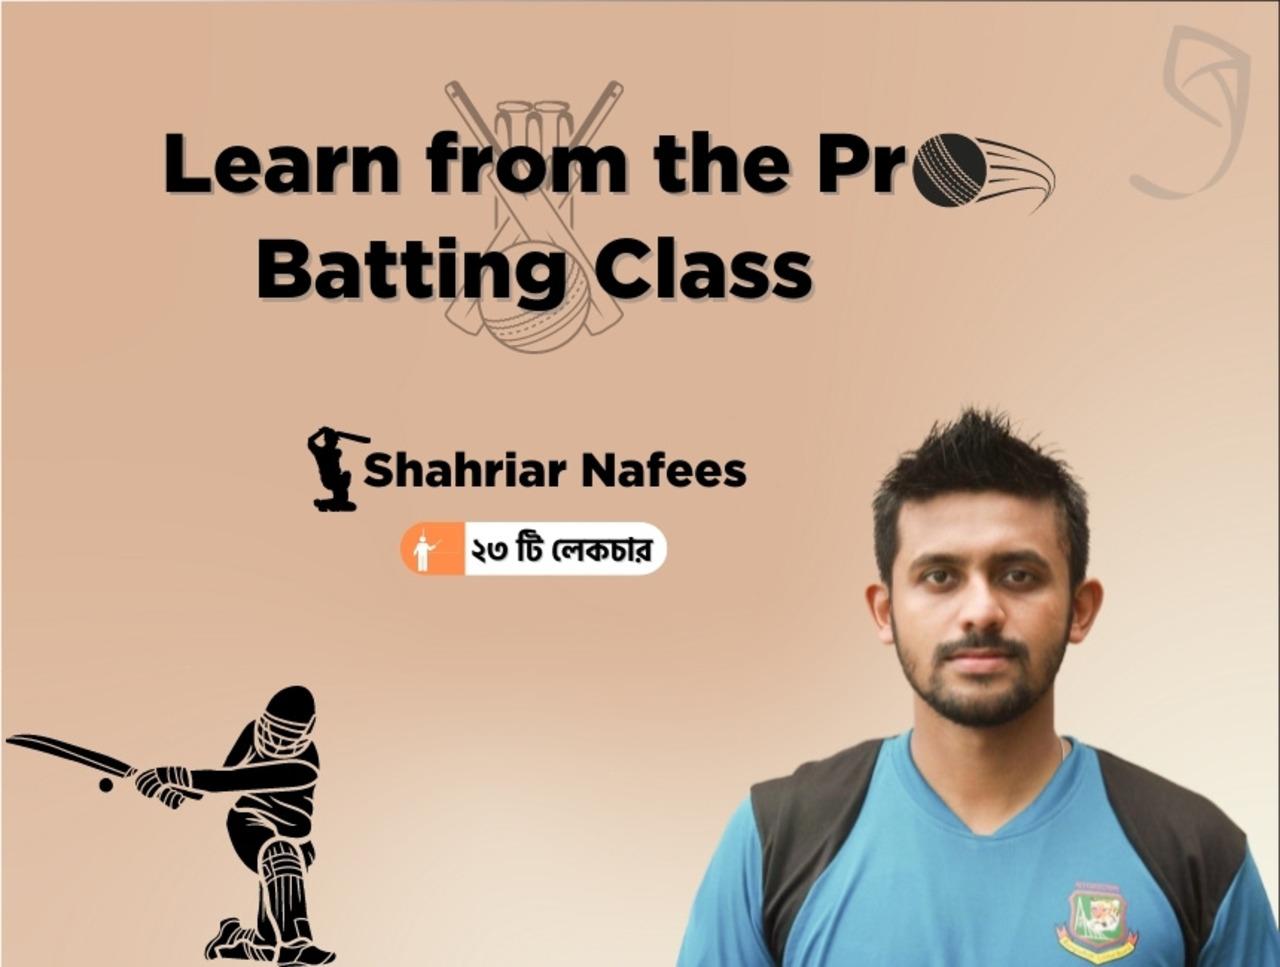 Learn from the Pro Batting Class with Shahriar Nafees